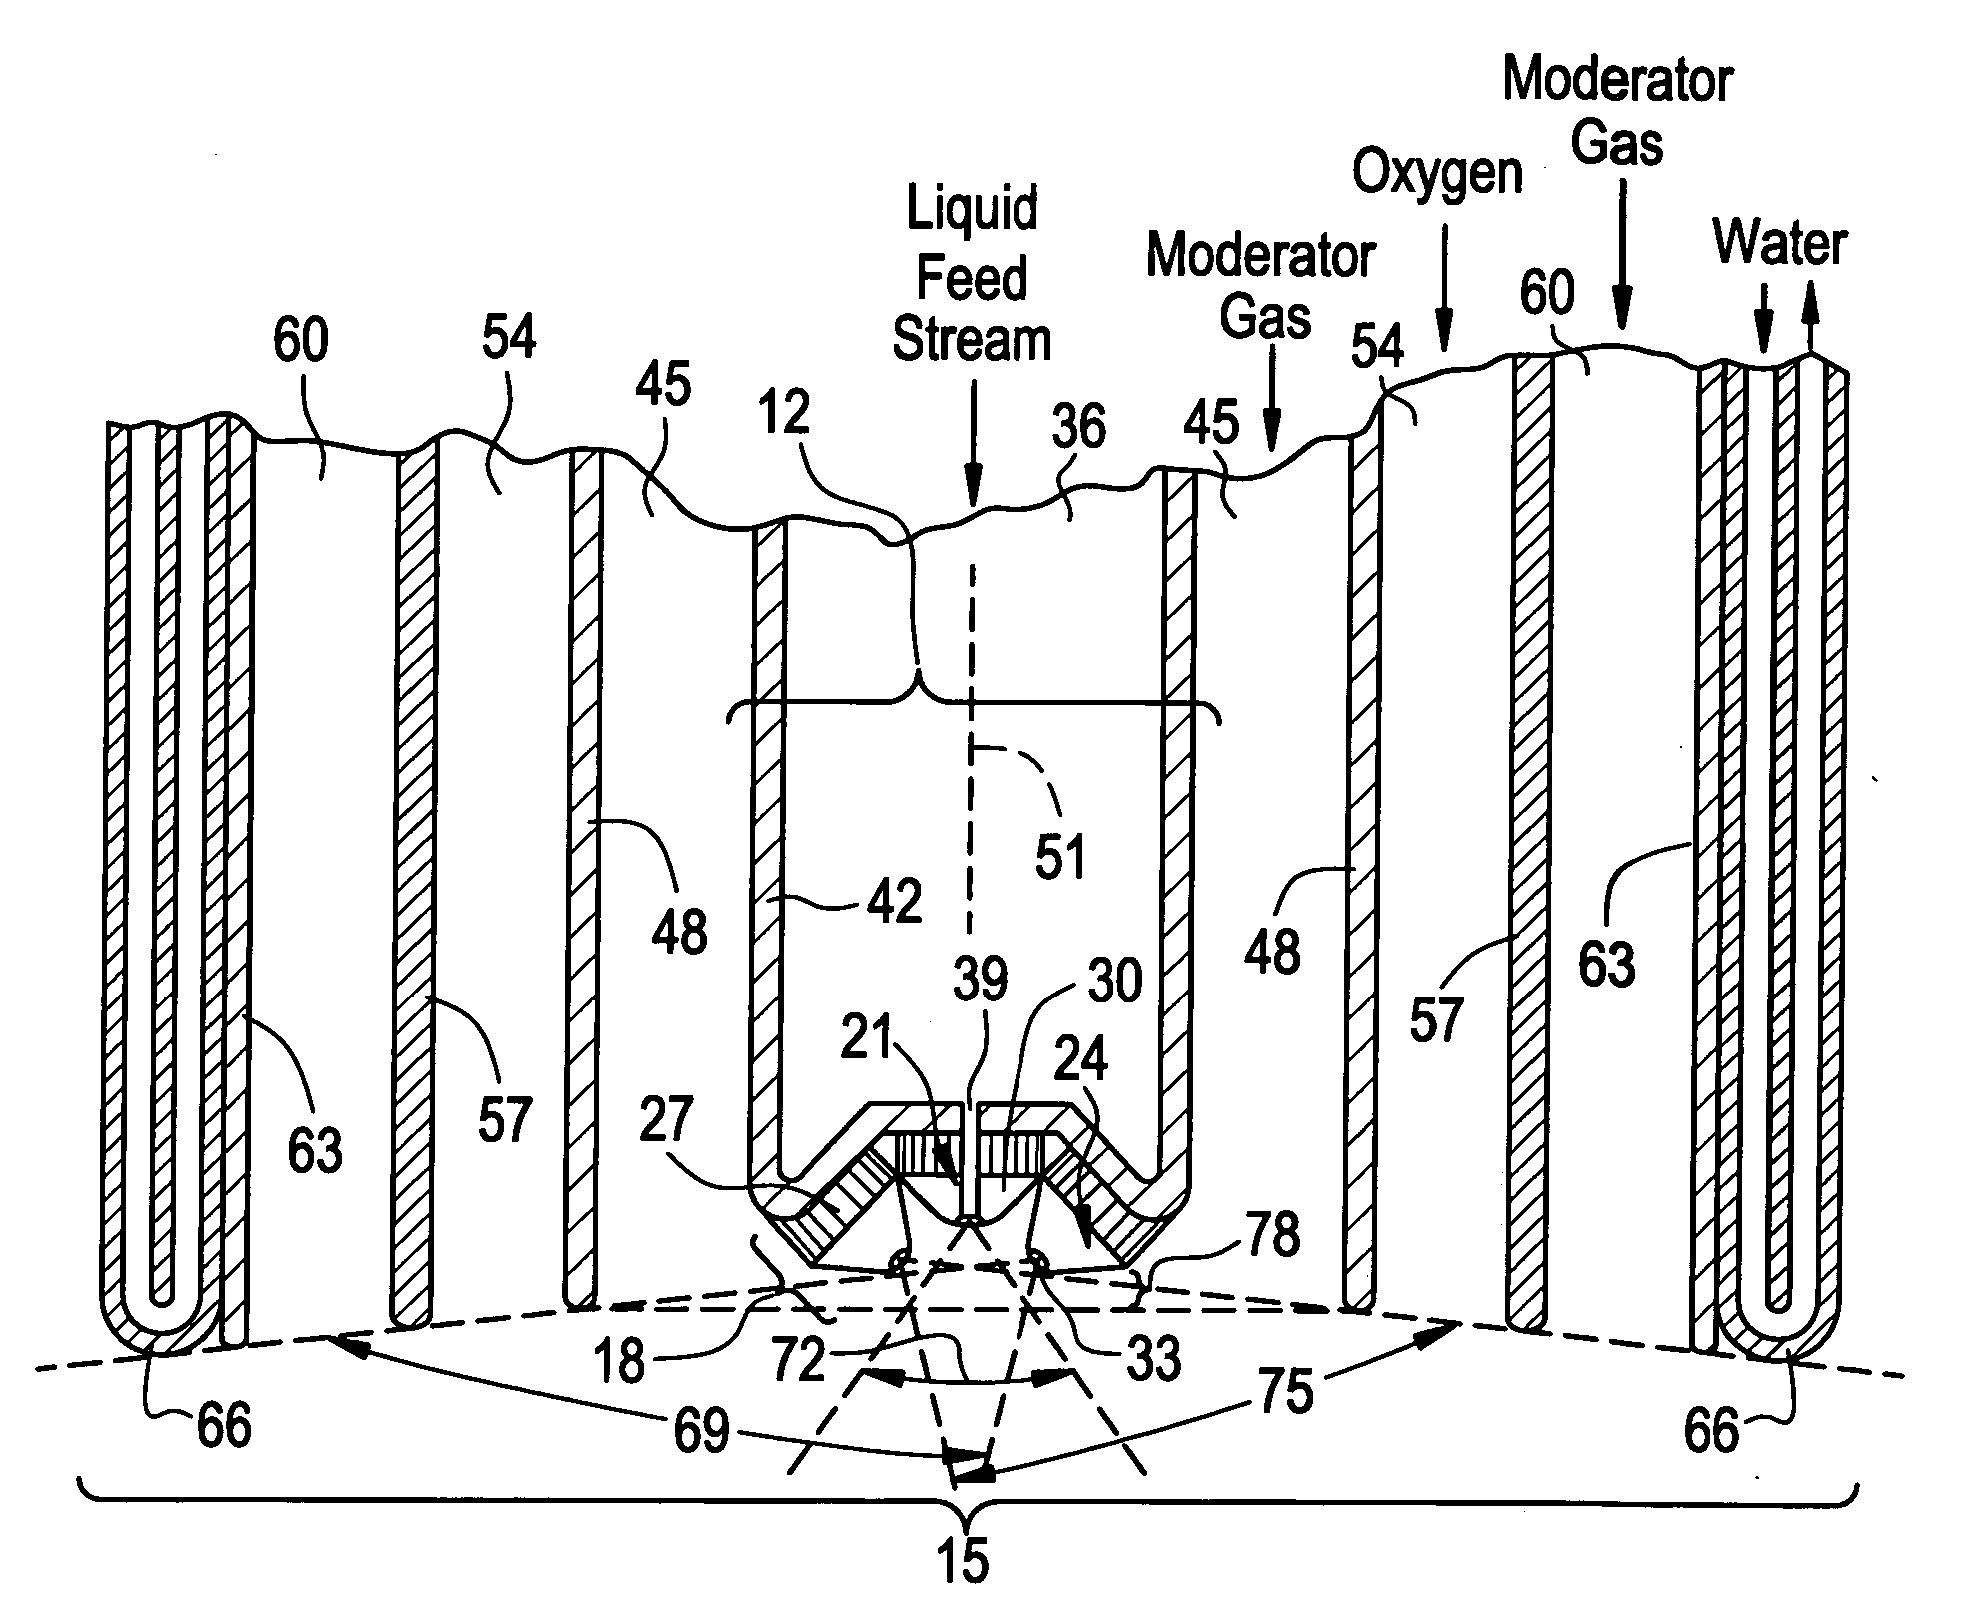 Feed nozzle assembly and burner apparatus for gas/liquid reactions